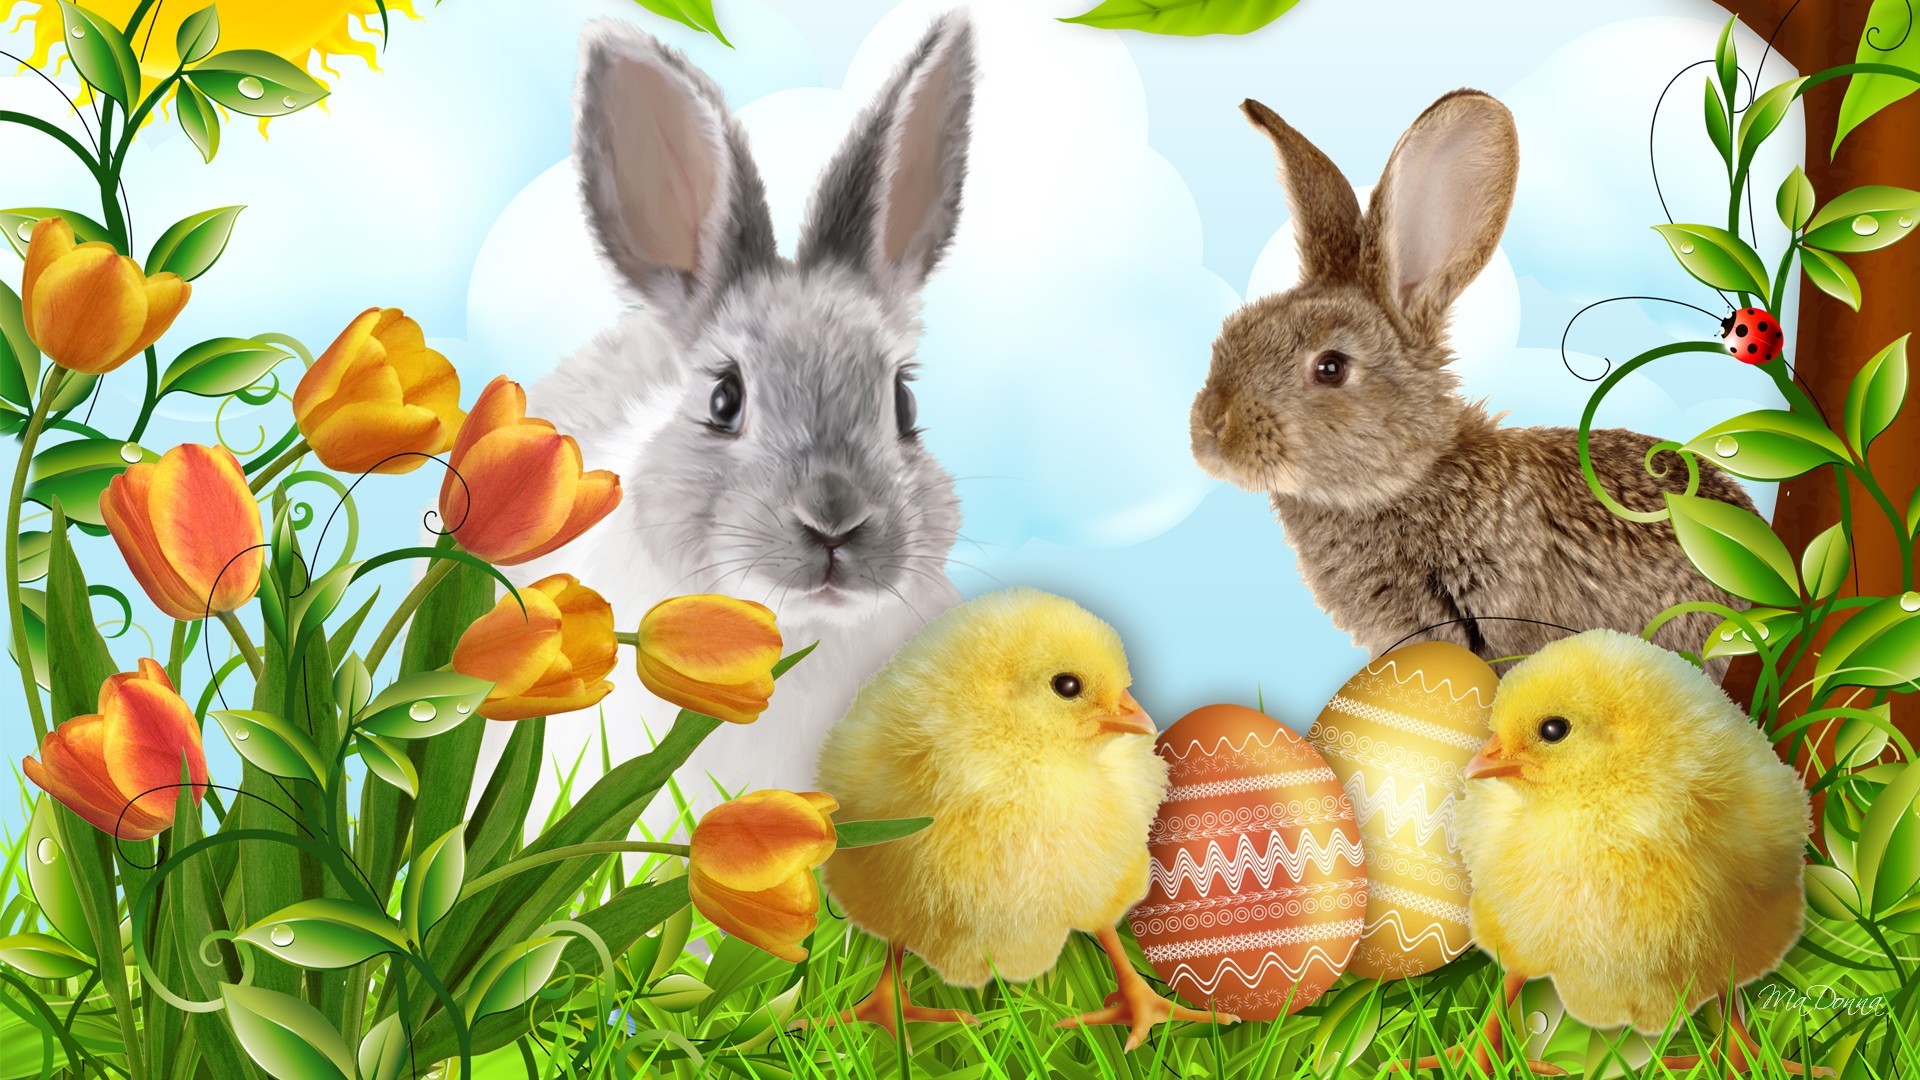 Happy Easter desktop hd wallpapers, hd images. Happy Easter cute bunny